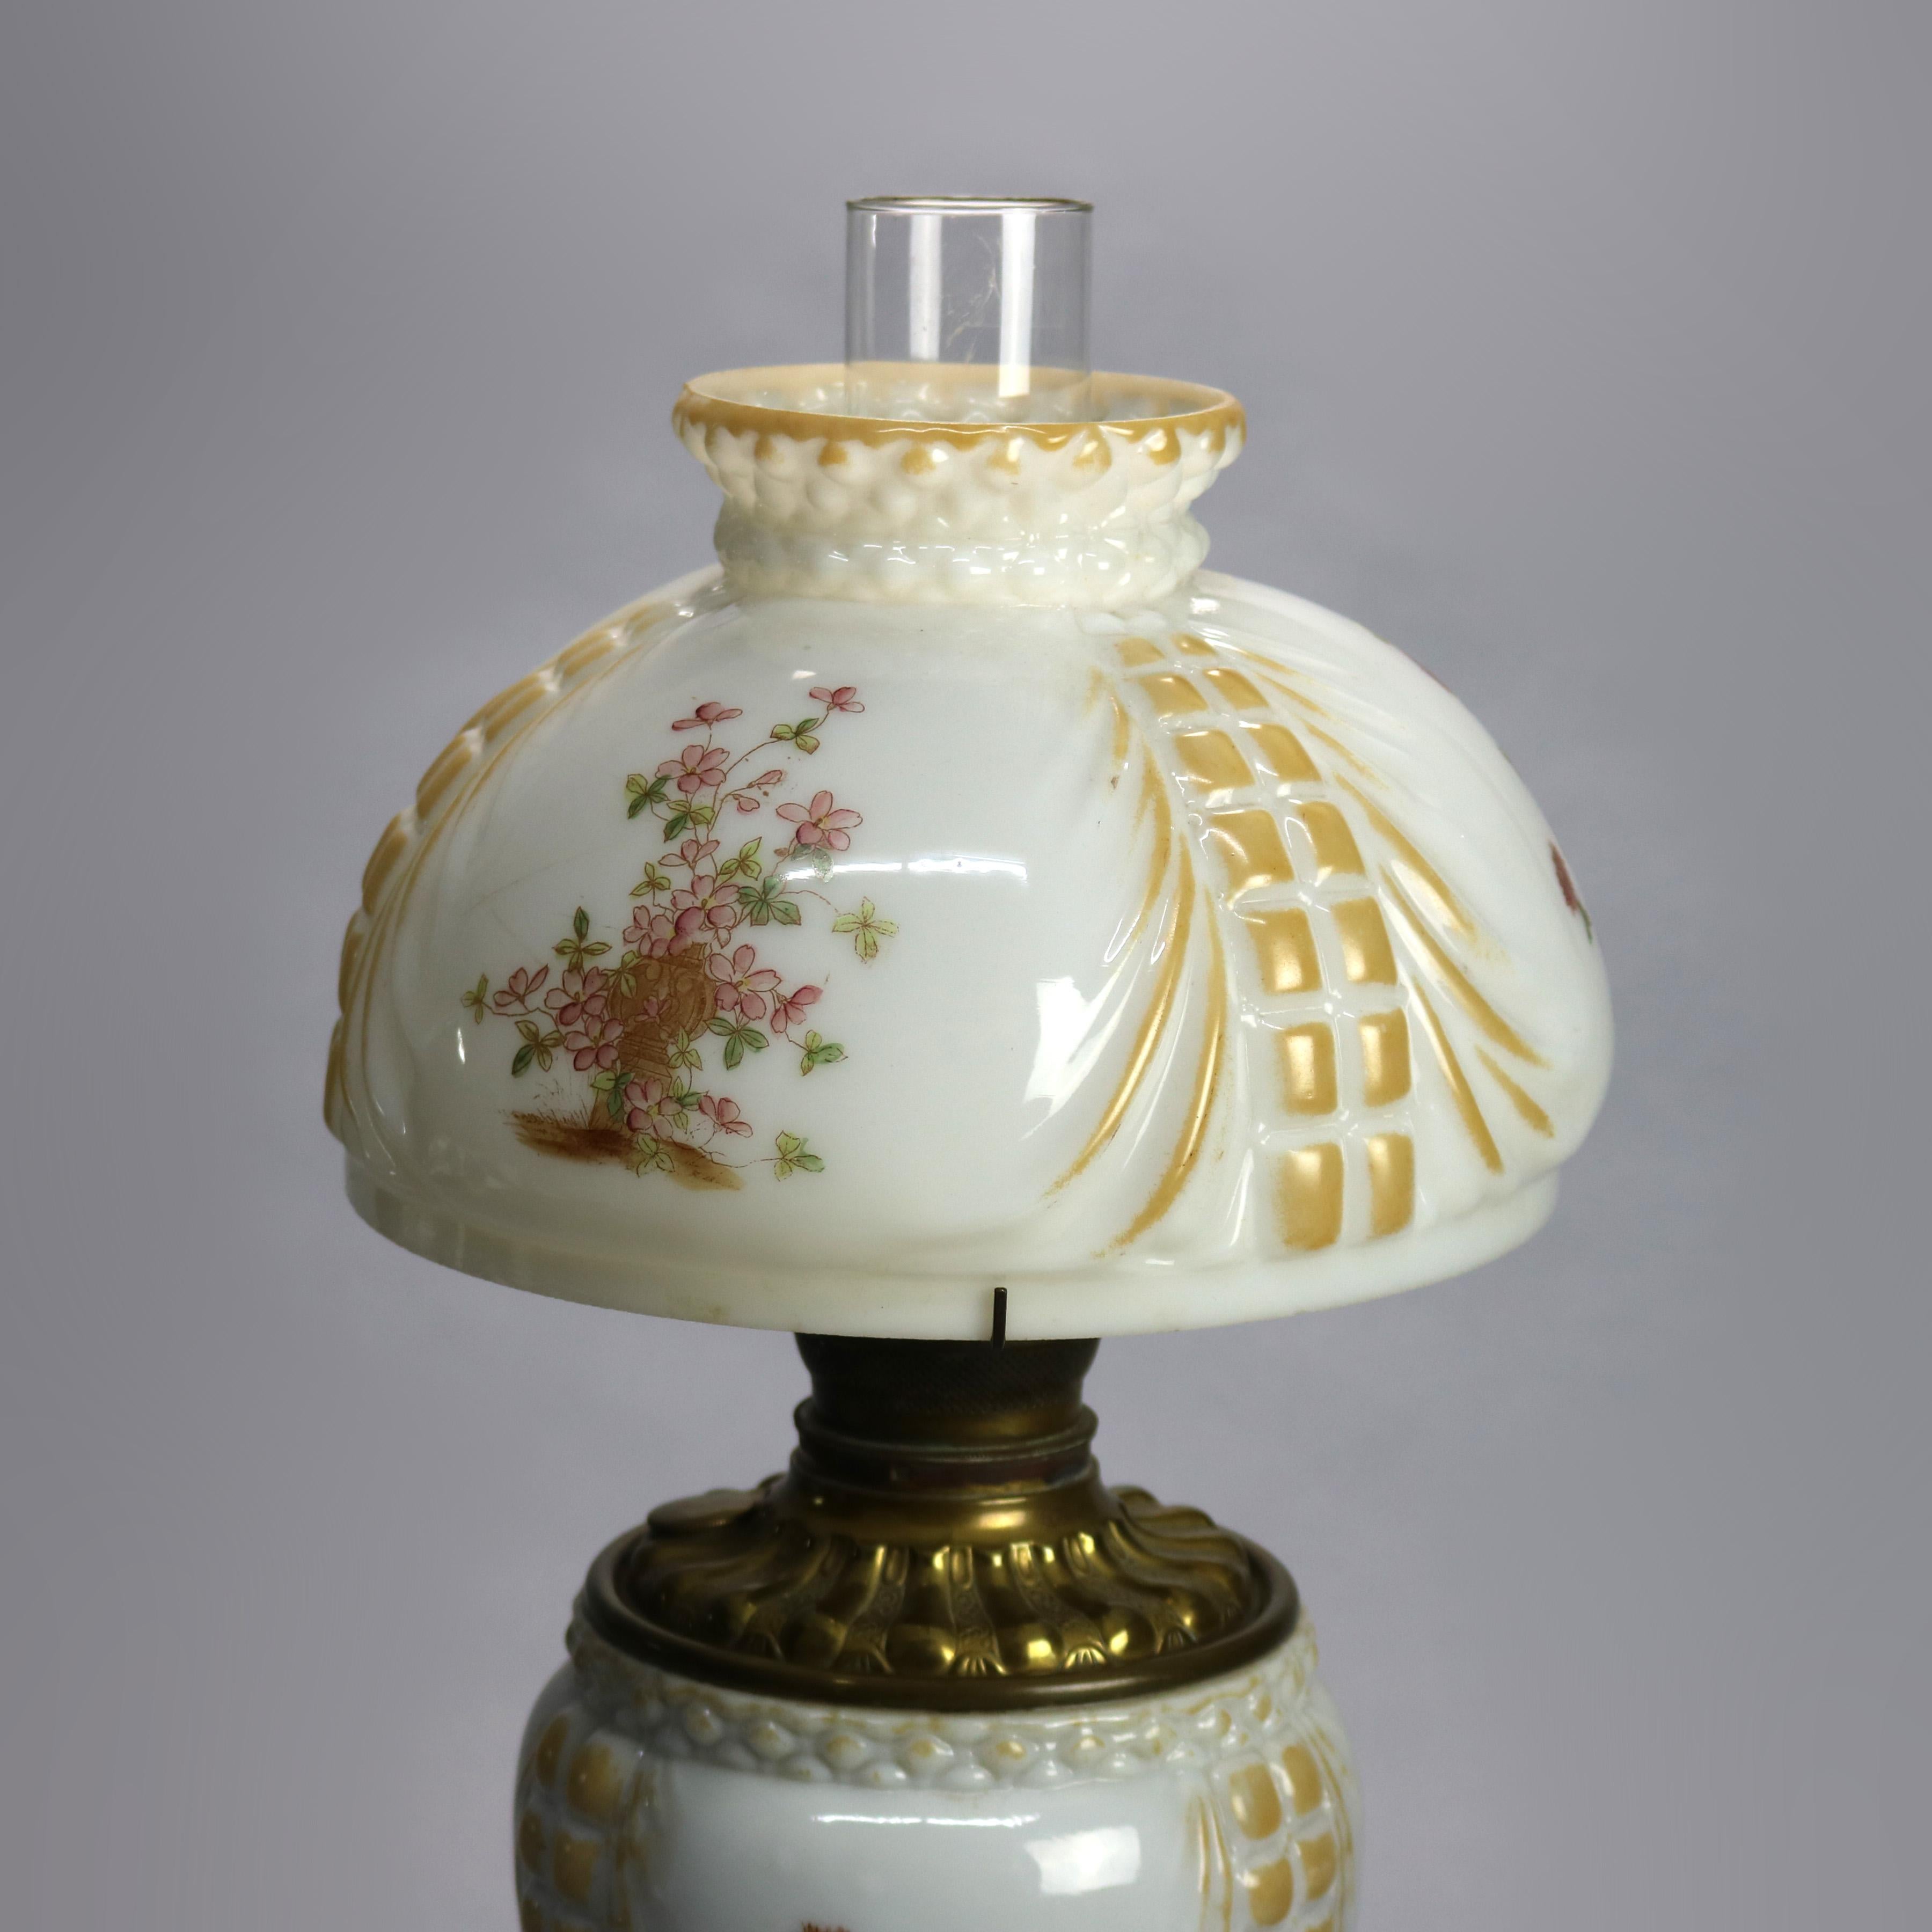 An antique Victorian Fostoria gone with the wind parlor lamp offers floral painted shade and font on foliate cast base, electrified, Circa 1890

Measures: 21.5